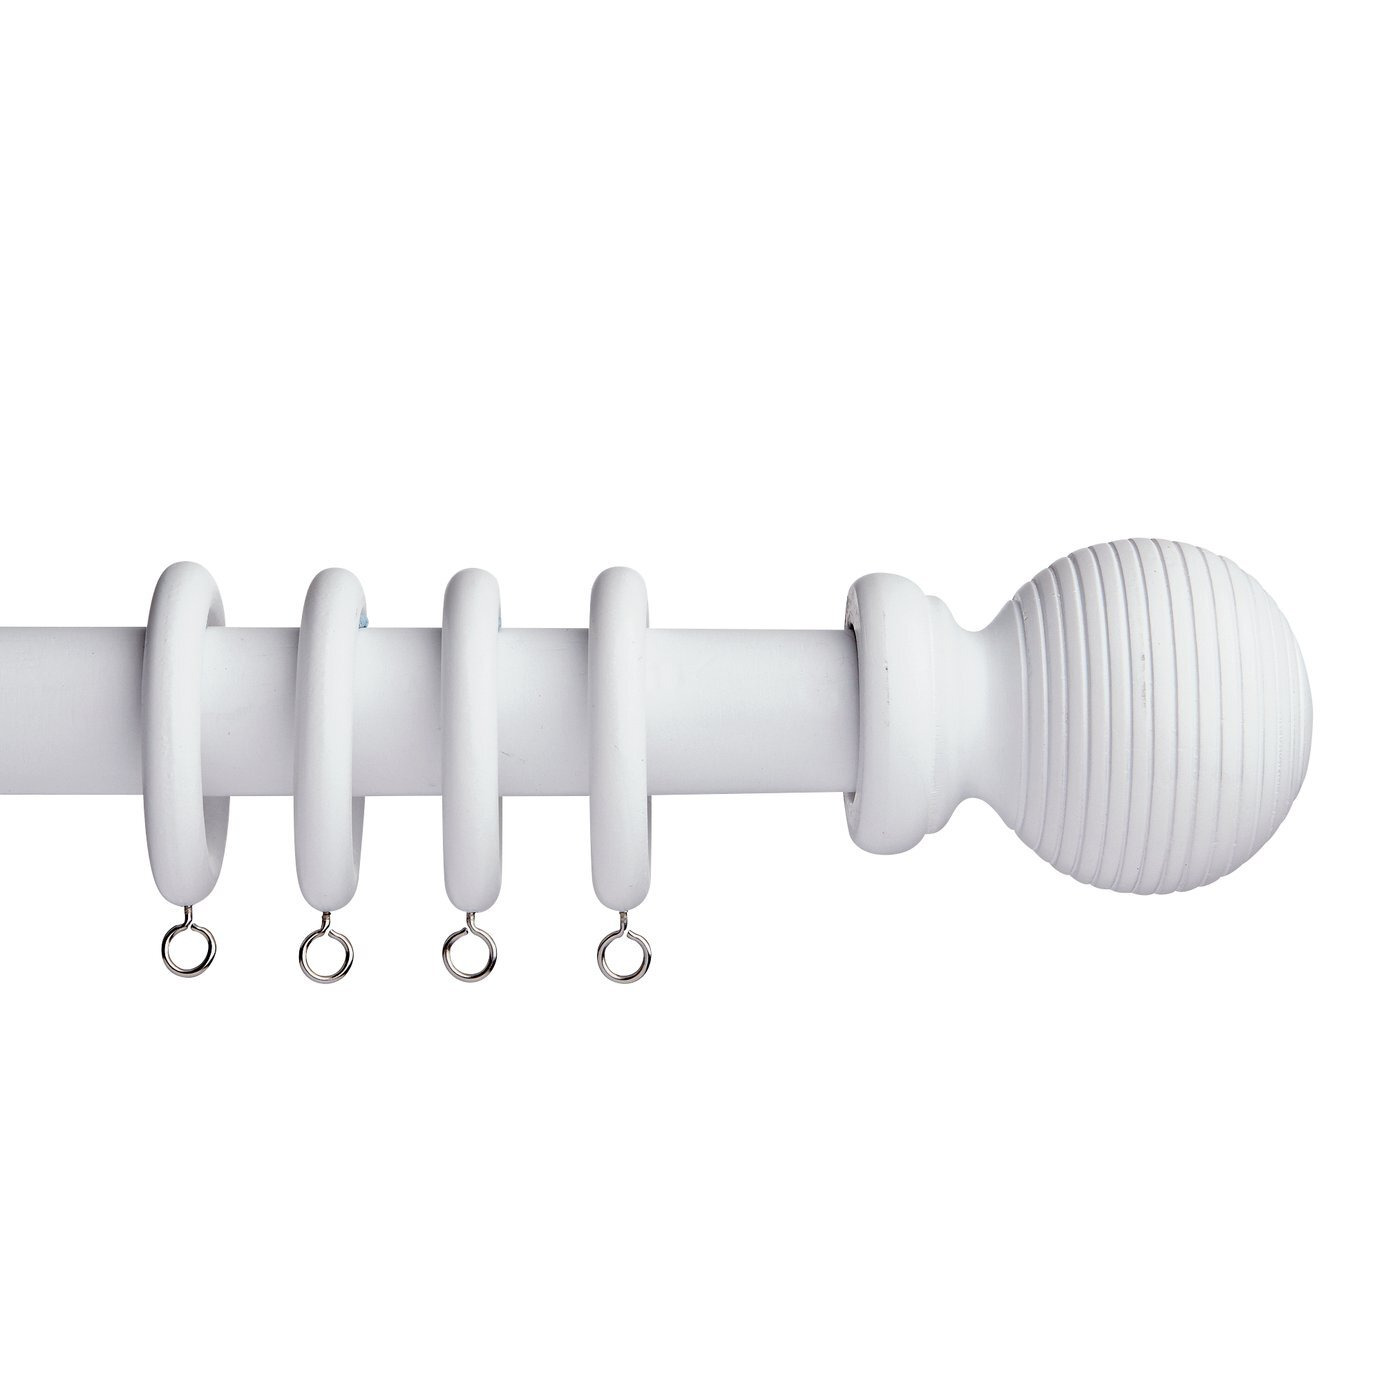 Argos Home 2.4m Grooved Ball Wooden Curtain Pole - White - image 1